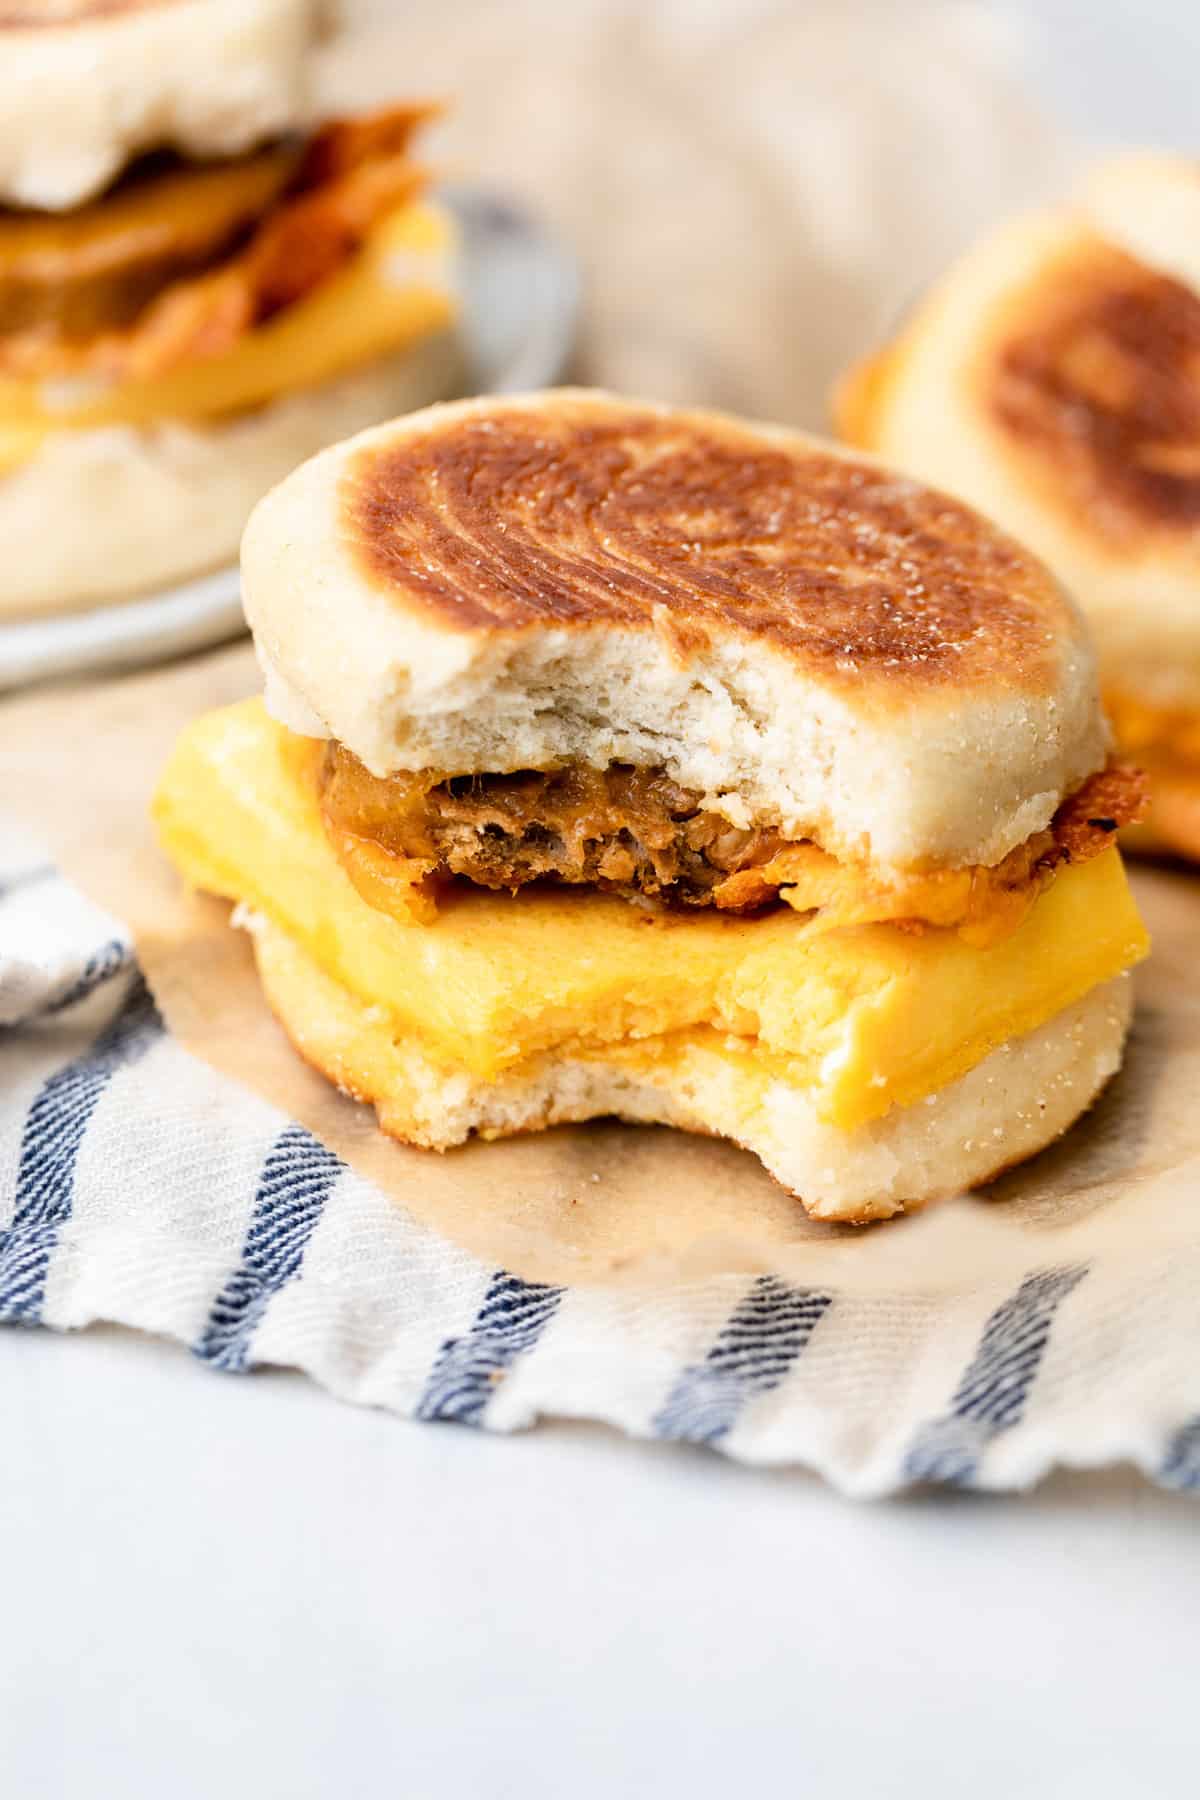 The BEST Way to Prepare (and Reheat) Breakfast Sandwiches - Home and Kind